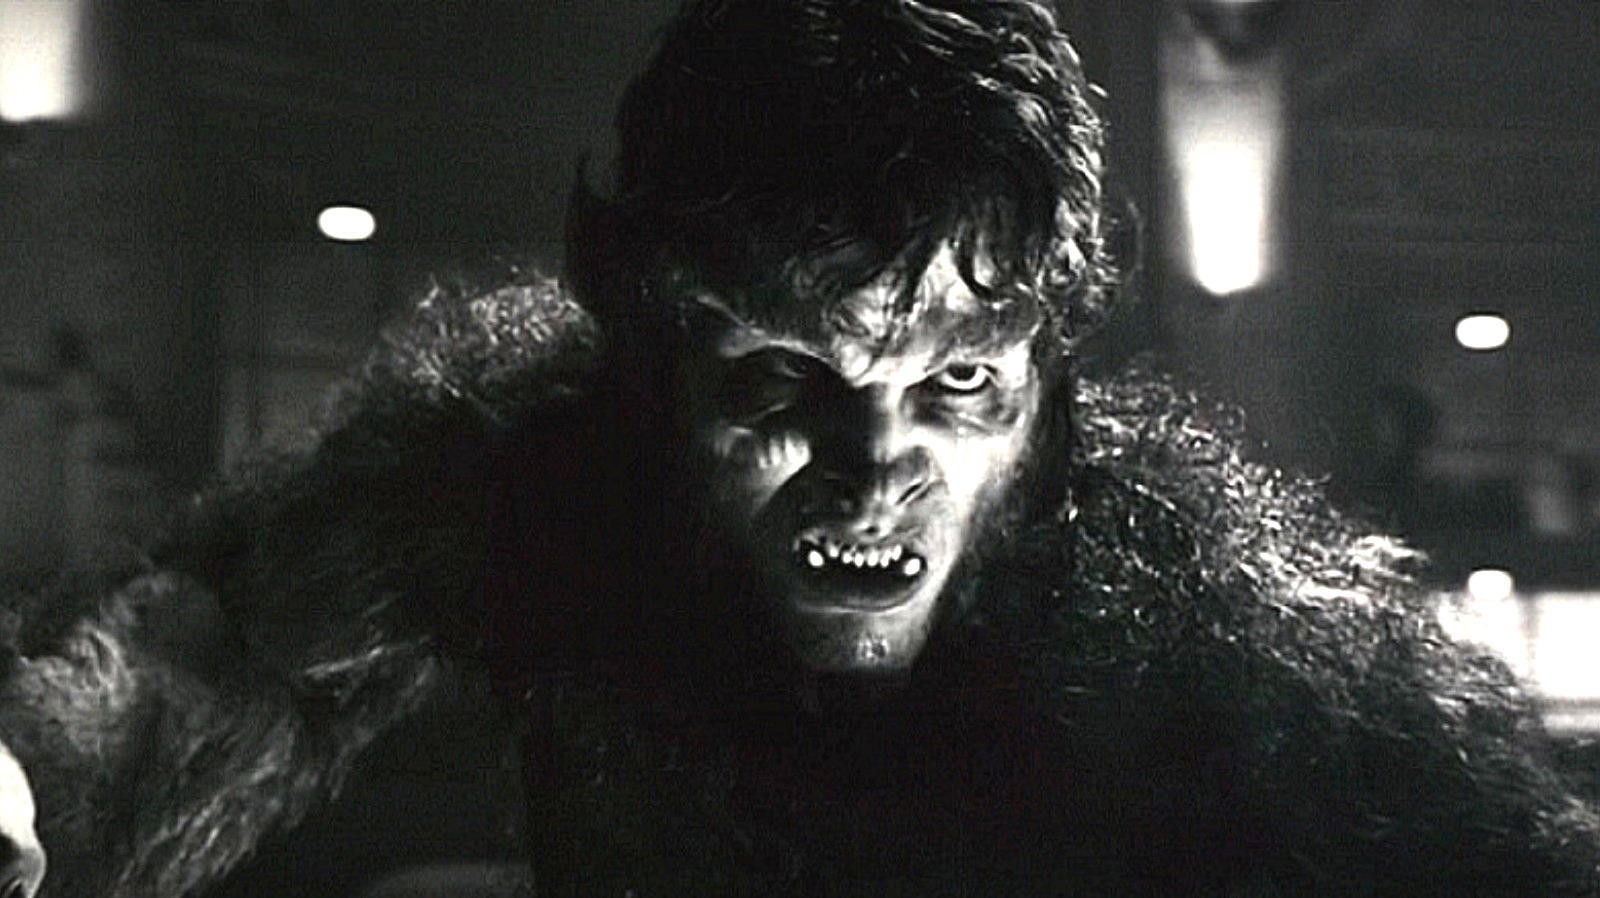 Every Character In Werewolf By Night, Ranked Worst To Best